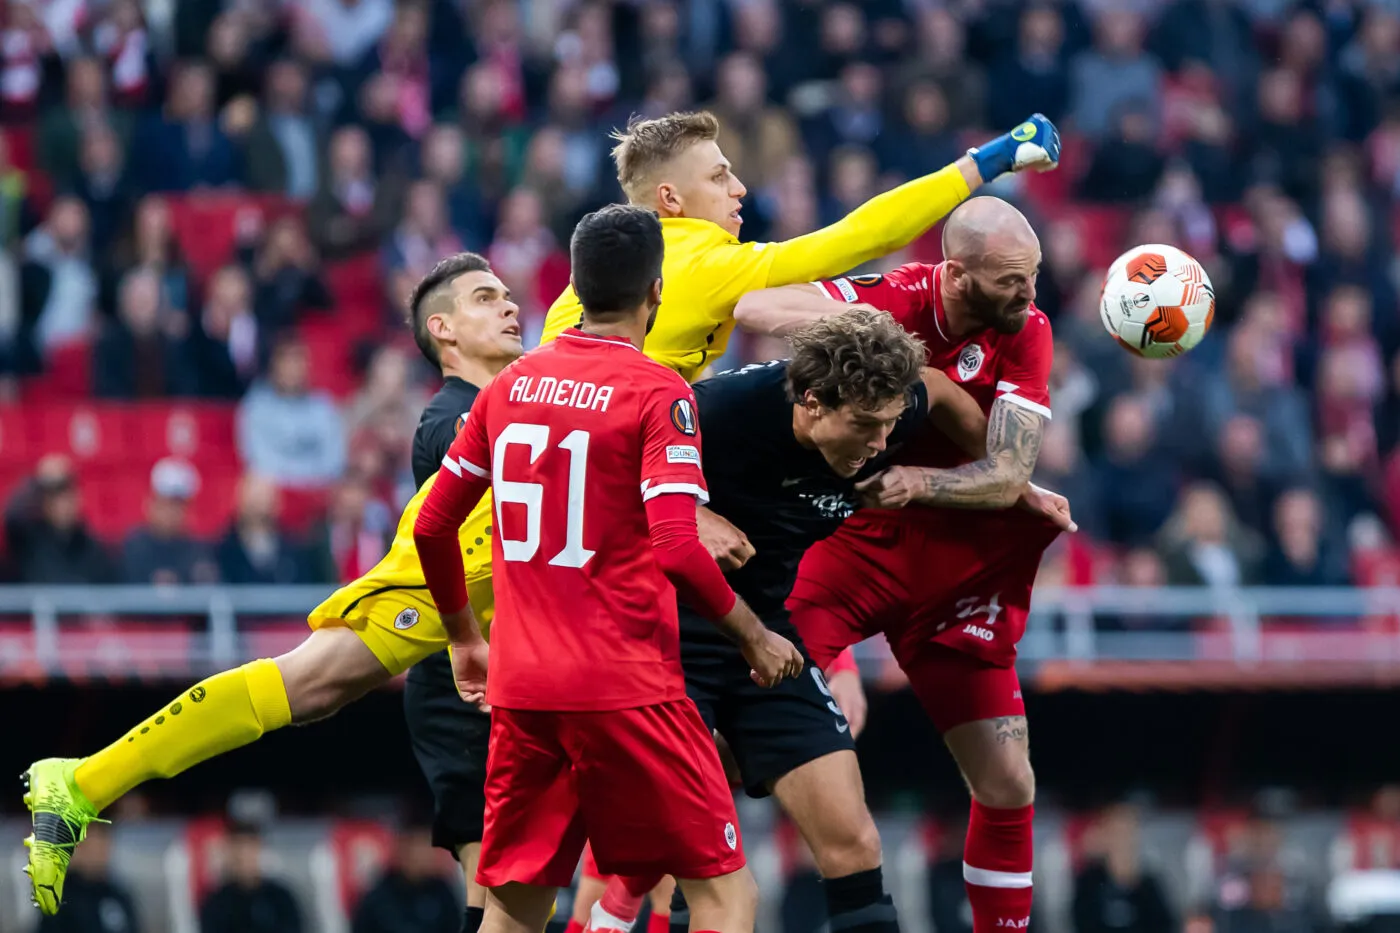 Antwerp's goalkeeper Jean Butez, Eintracht's Sam Lammers and Antwerp's Dorian Dessoleil pictured in action during a soccer game between Belgian Royal Antwerp FC and German Eindracht Frankfurt, Thursday 30 September 2021, in Antwerp, on the second day (out of six) of the Europa League group stage, in the Group D. BELGA PHOTO KRISTOF VAN ACCOM 
By Icon Sport